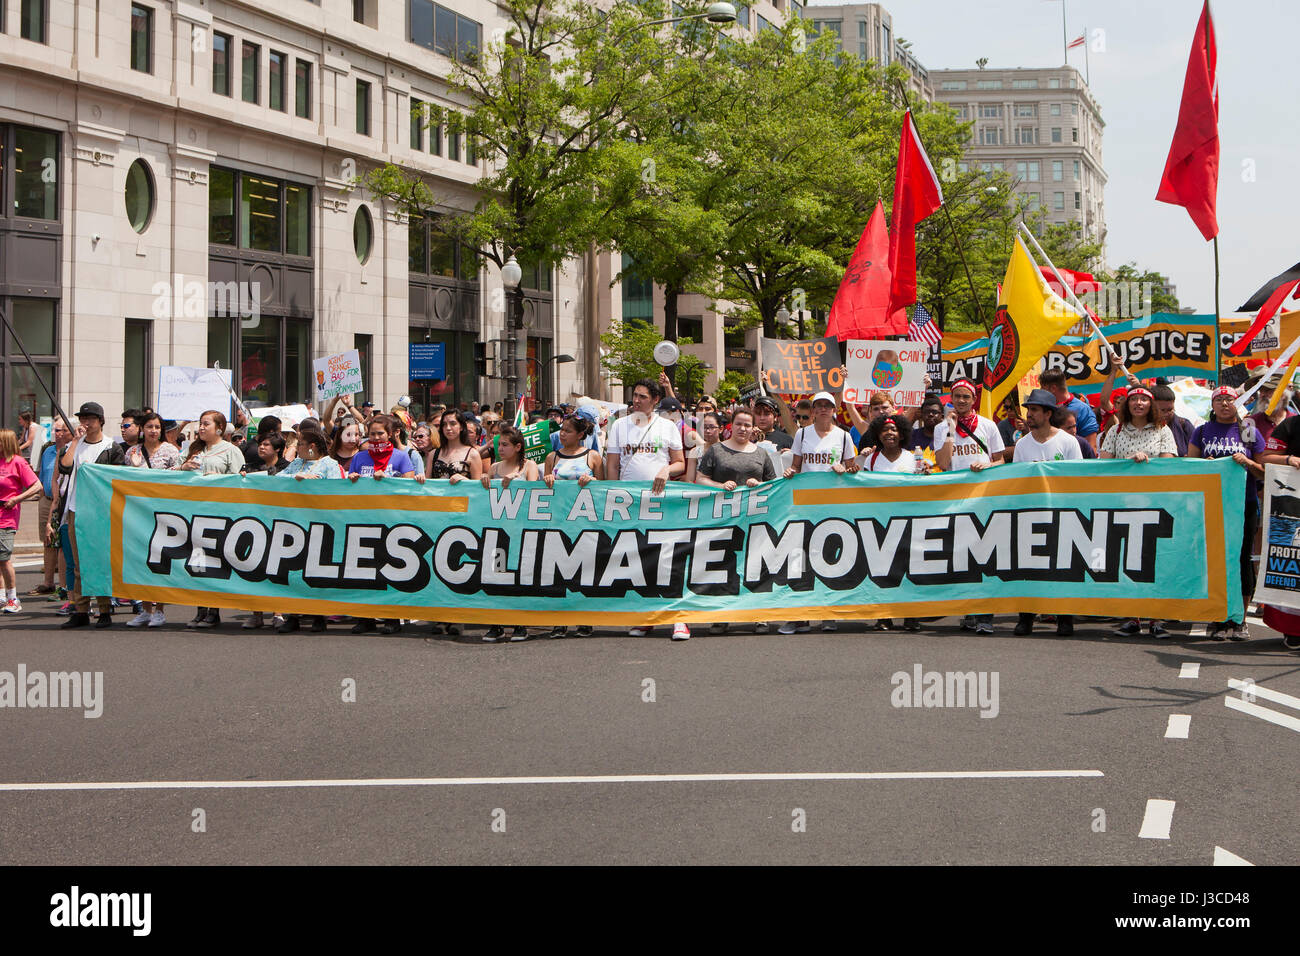 2017 People's Climate March (protesters marching with Peoples Climate Movement banner) - Washington, DC USA Stock Photo